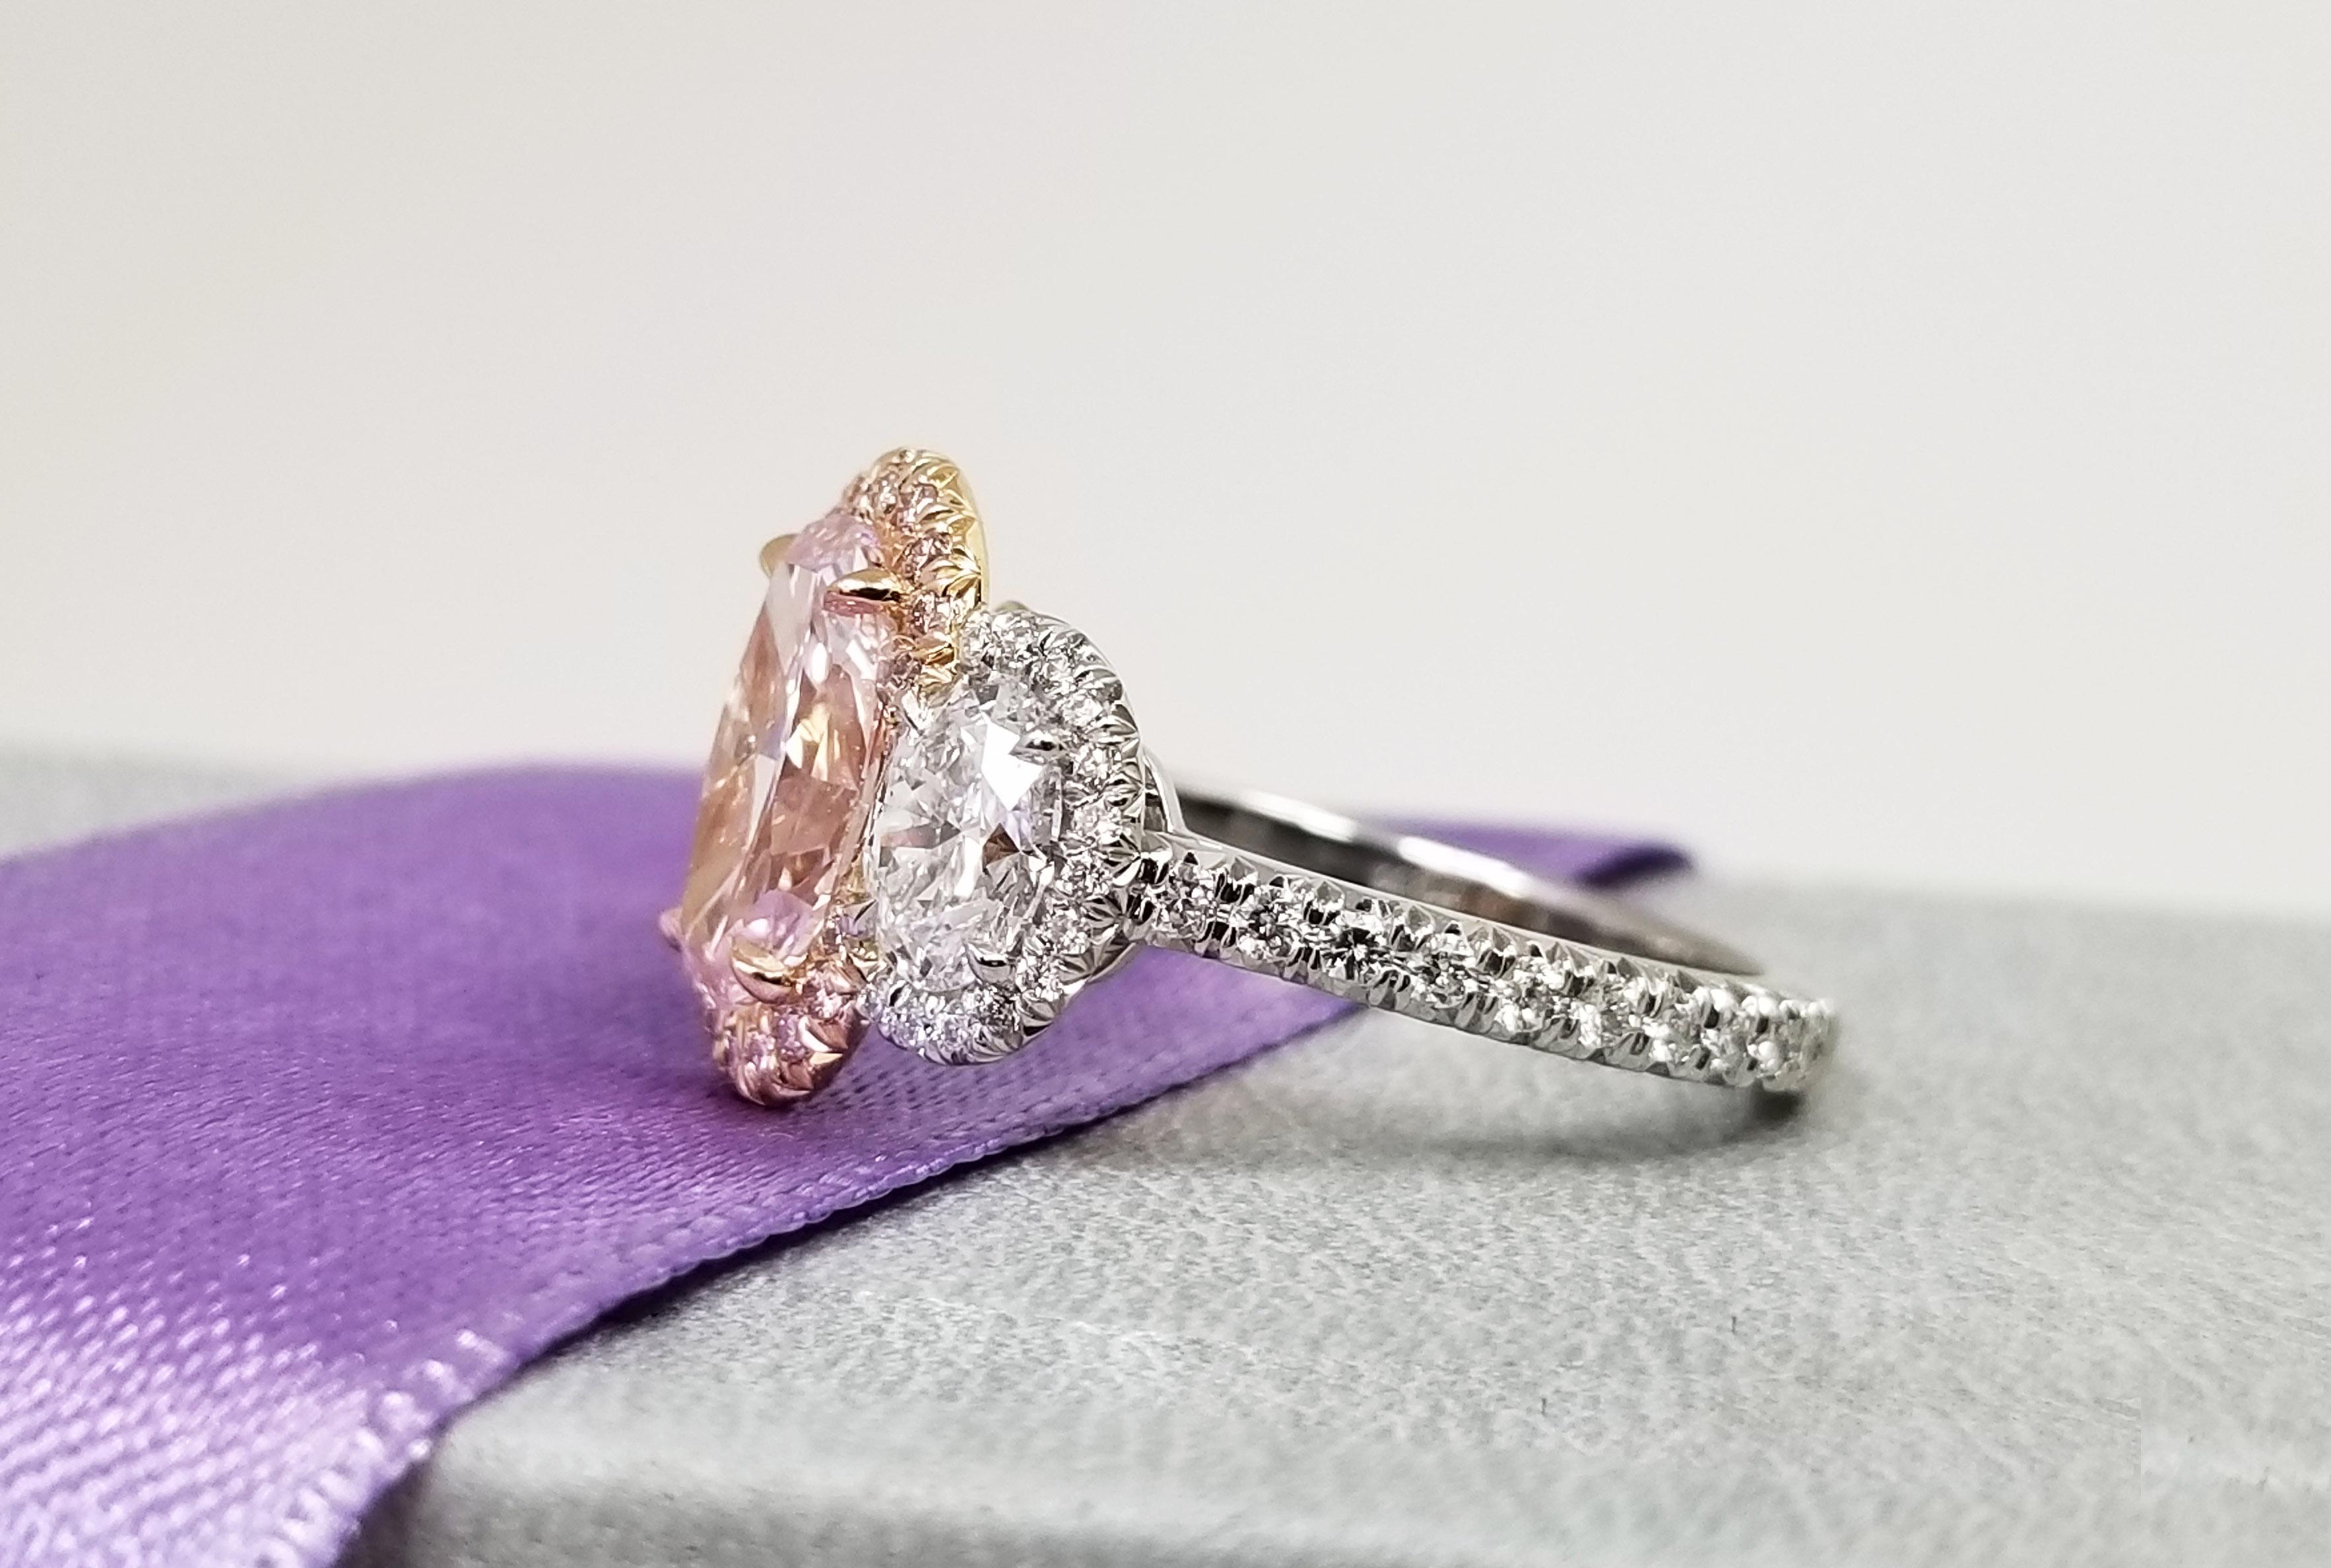 Contemporary Scarselli 1.50 Carat Fancy Pink Oval Diamond Ring in Platinum and 18 Karat Gold